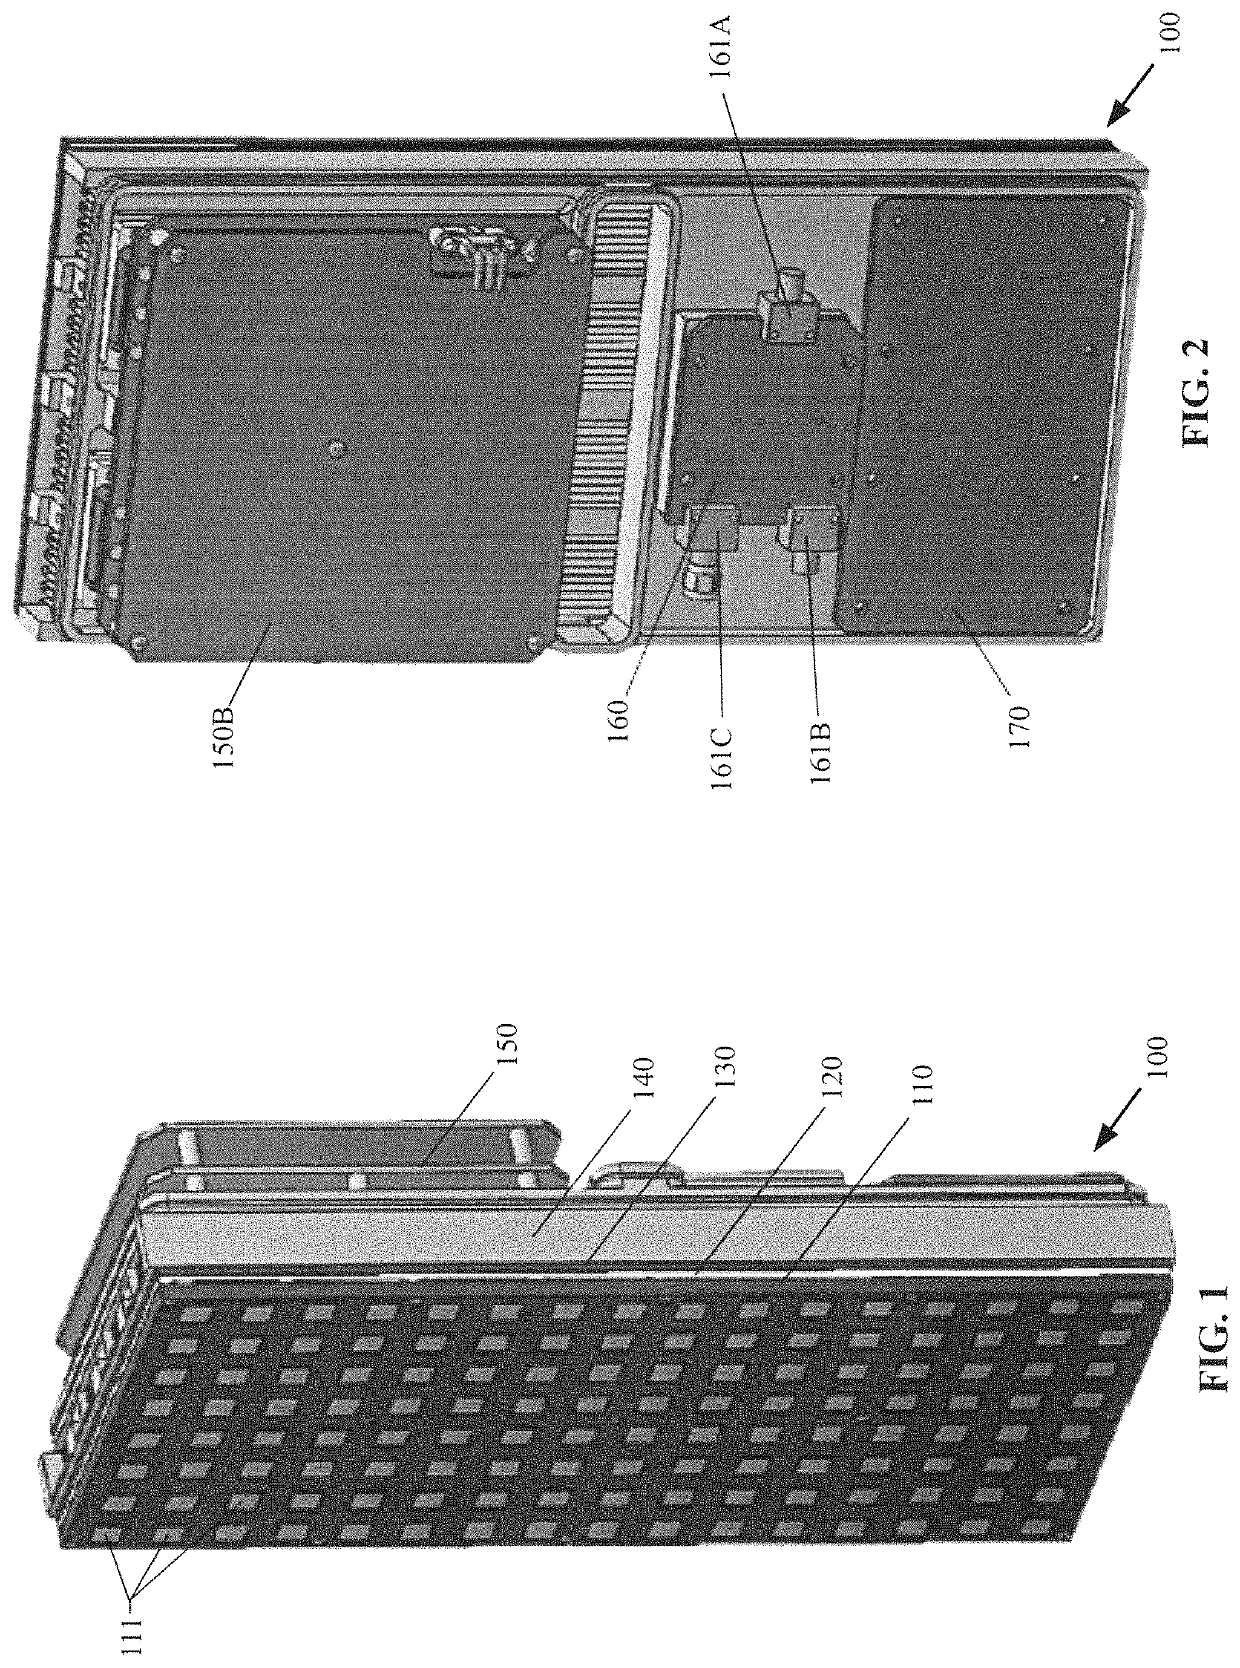 Air-cooled heat exchanger and thermal arrangement for stacked electronics